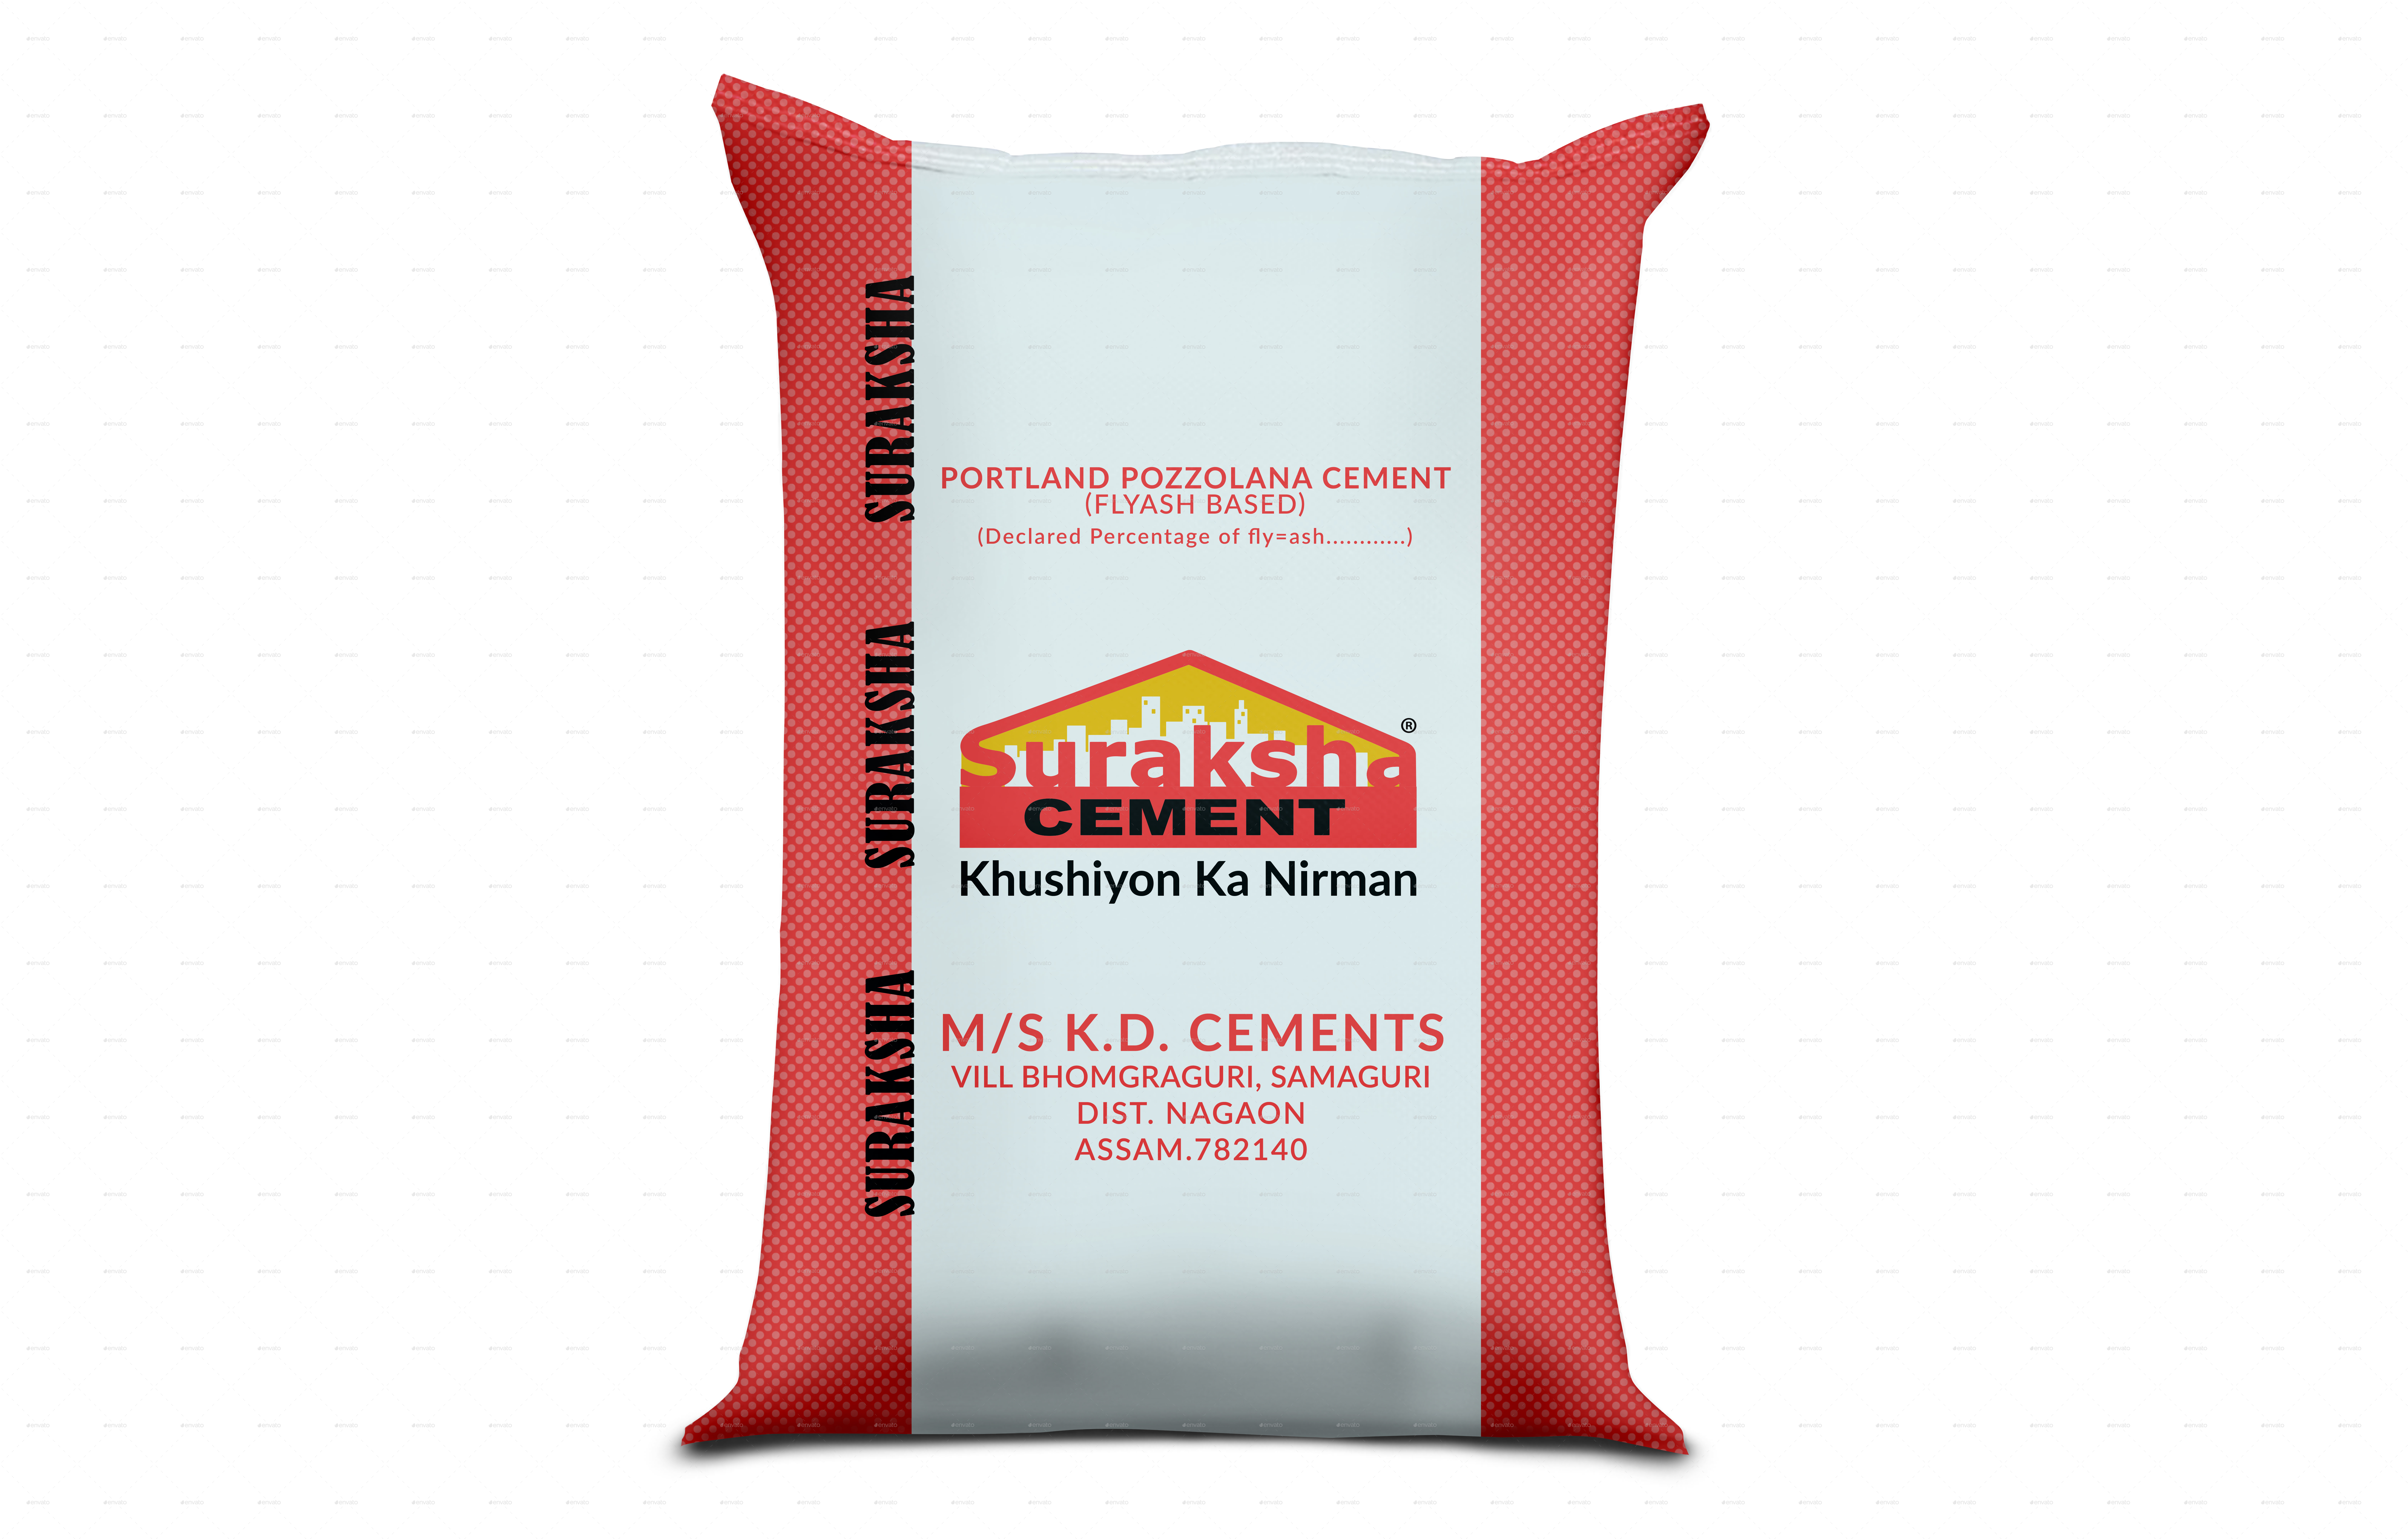 Download Cement or Flour Mockup by theCreativeowl | GraphicRiver